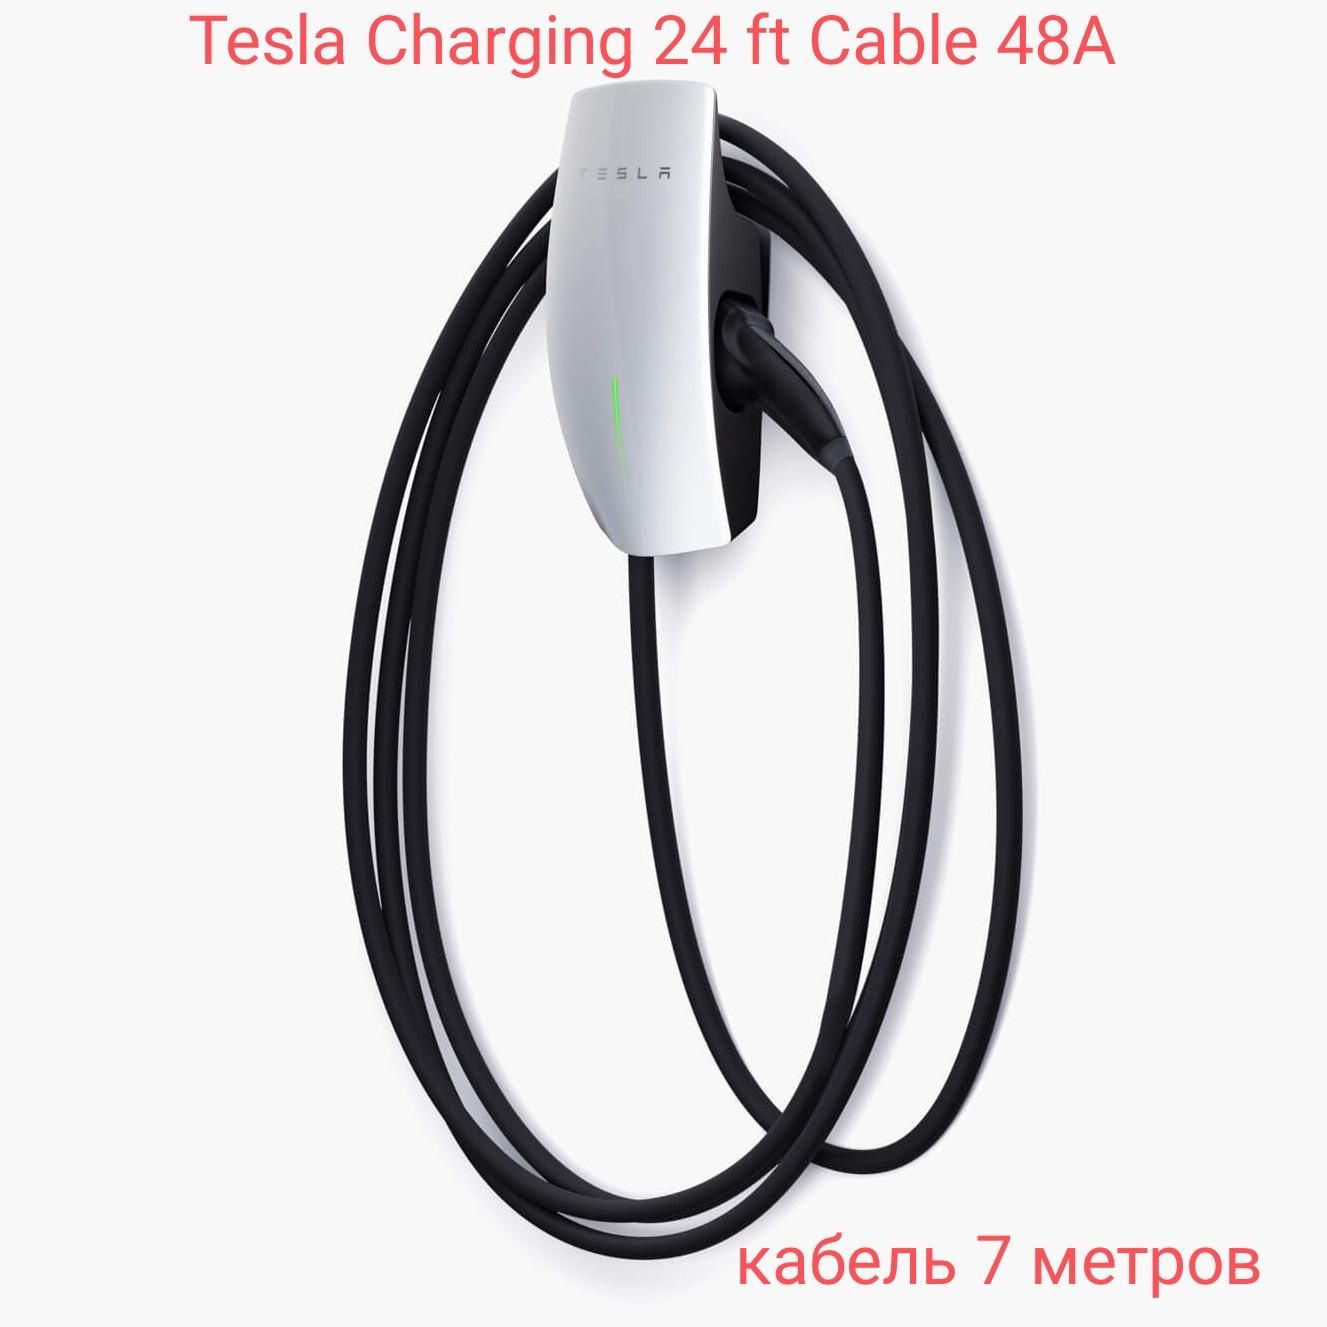 Tesla Charging 24 ft Cable 48A Wall Connector USA model !!! Скидка 650